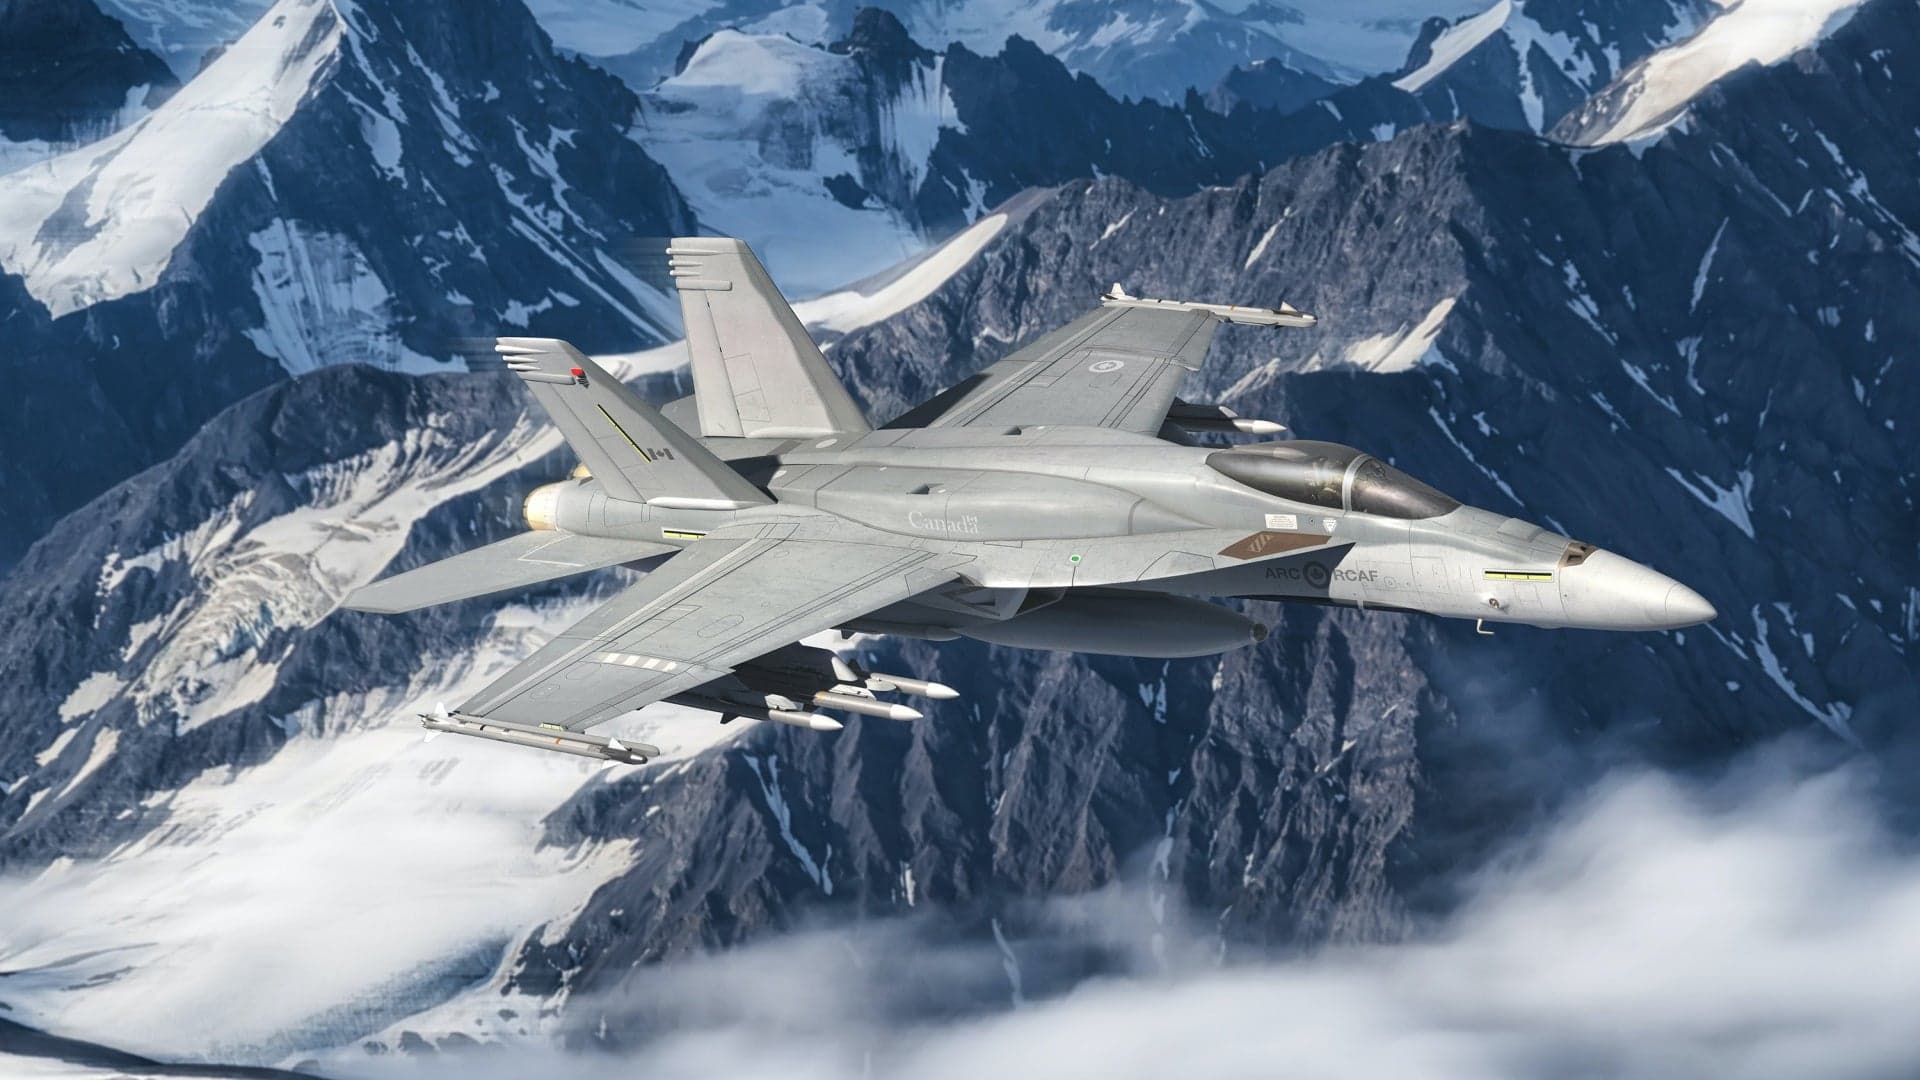 It’s Official, Canada Has Rejected The F/A-18 Super Hornet As Its Next Fighter